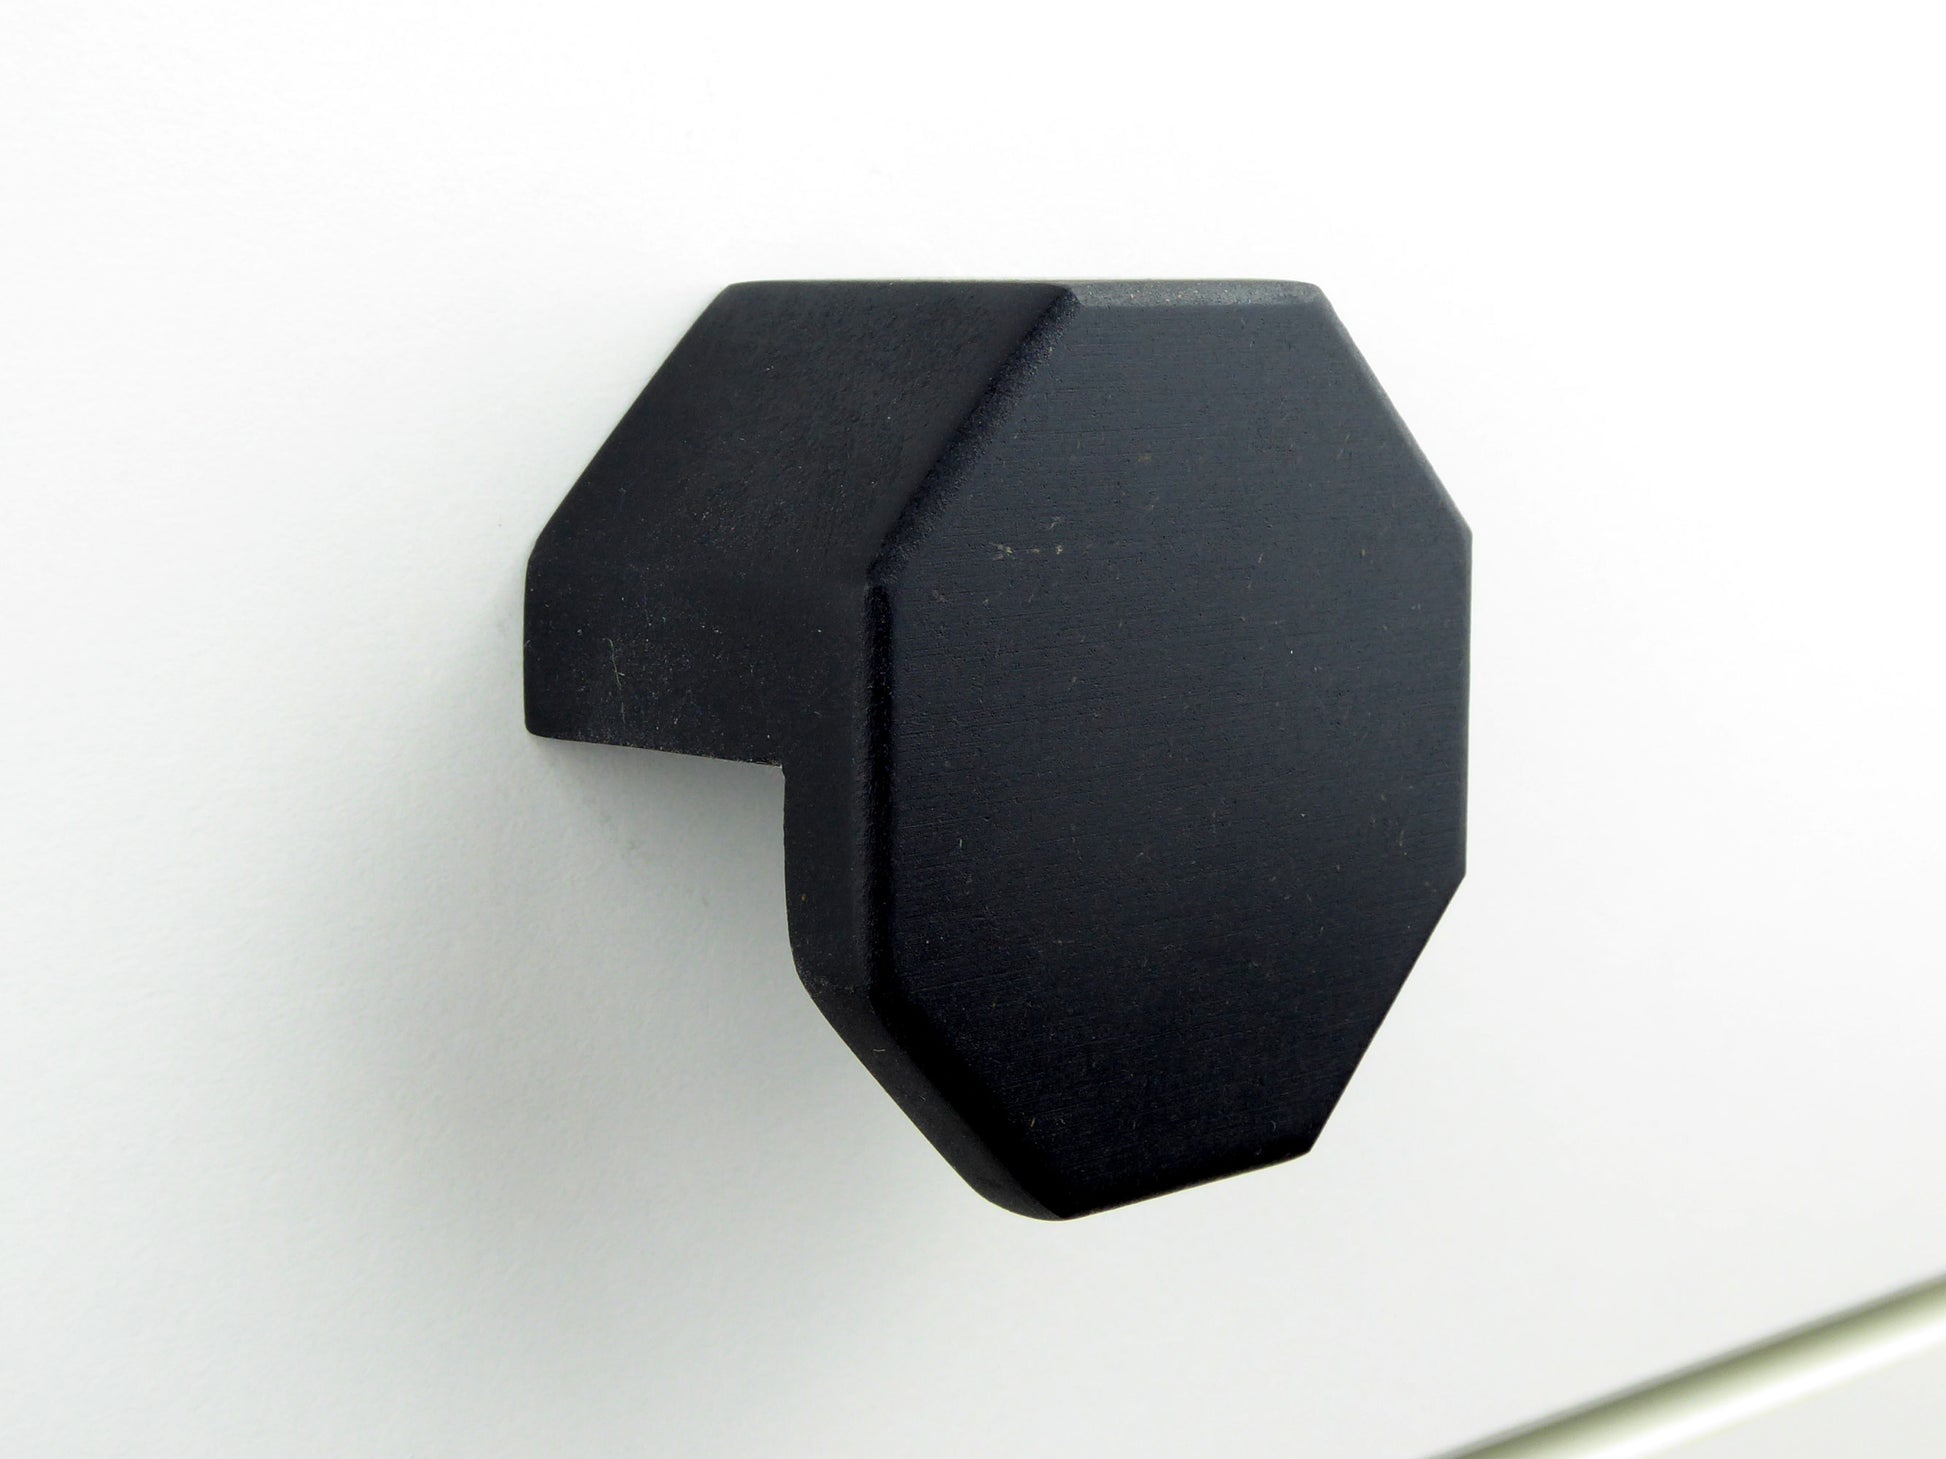 octagonal knob for kitchen cabinets